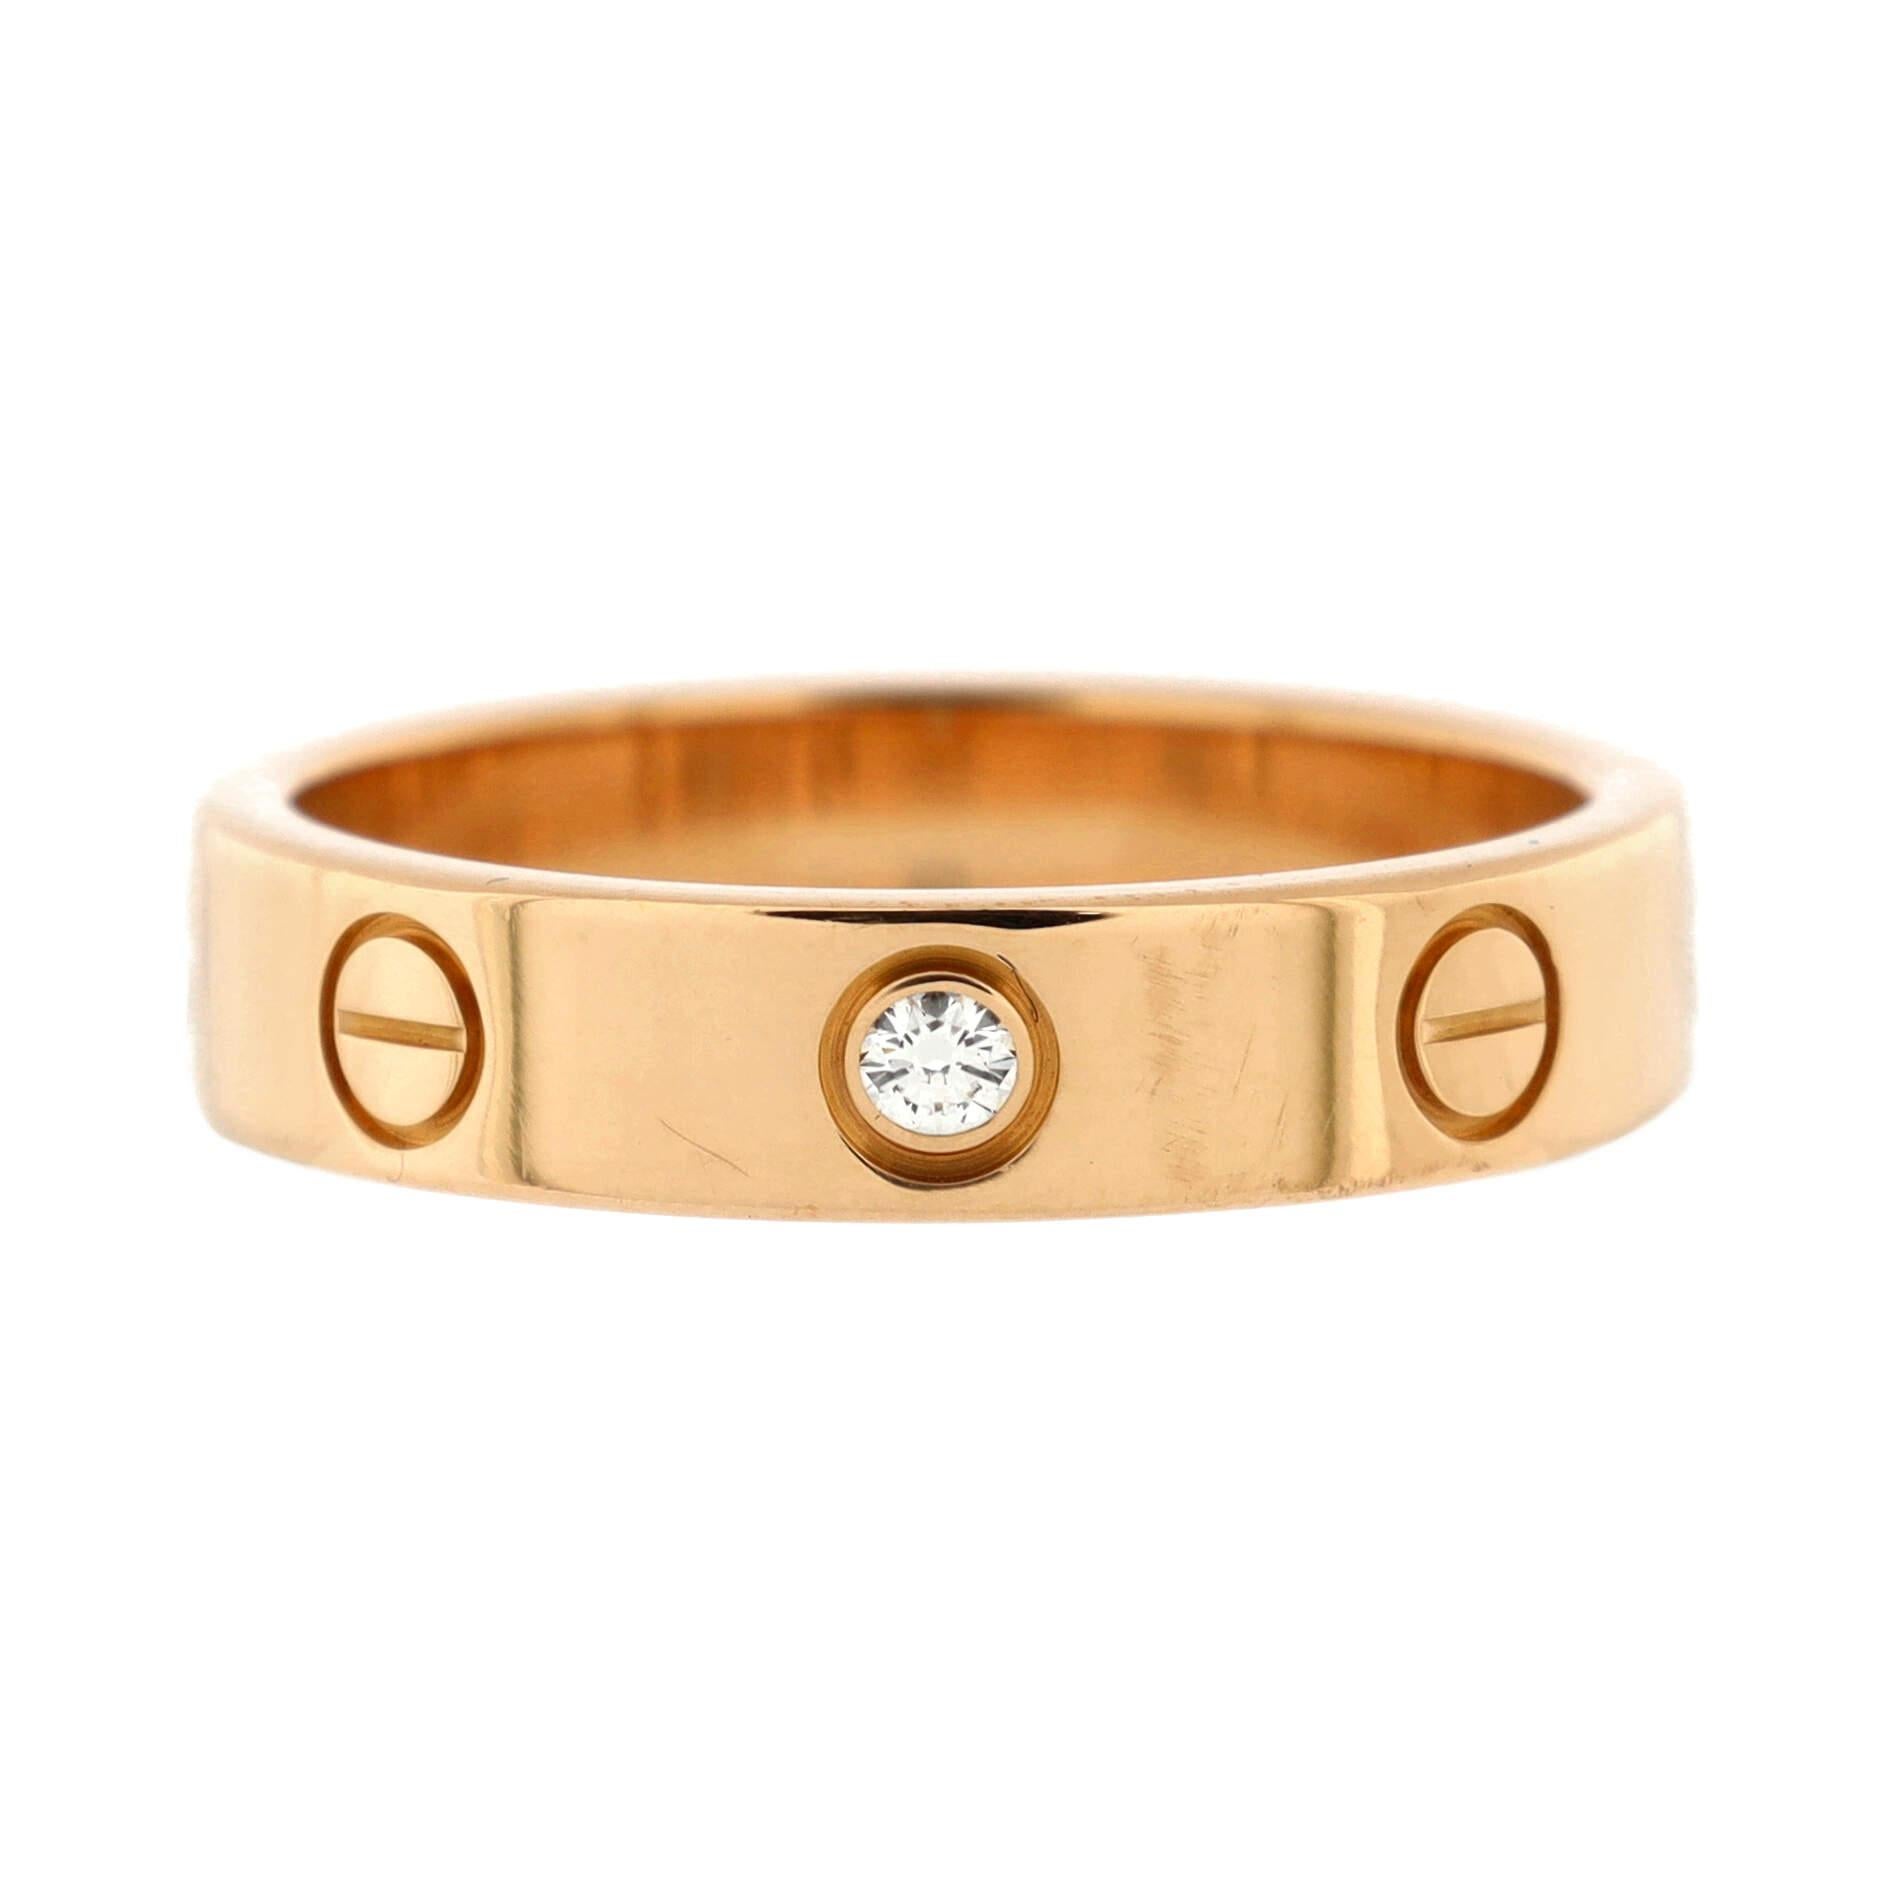 Condition: Good. Moderately heavy re-polishing throughout.
Accessories: No Accessories
Measurements: Size: 5.25 - 50, Width: 4.00 mm
Designer: Cartier
Model: Love Wedding Band 1 Diamond Ring 18K Rose Gold with Diamond
Exterior Color: Rose Gold
Item